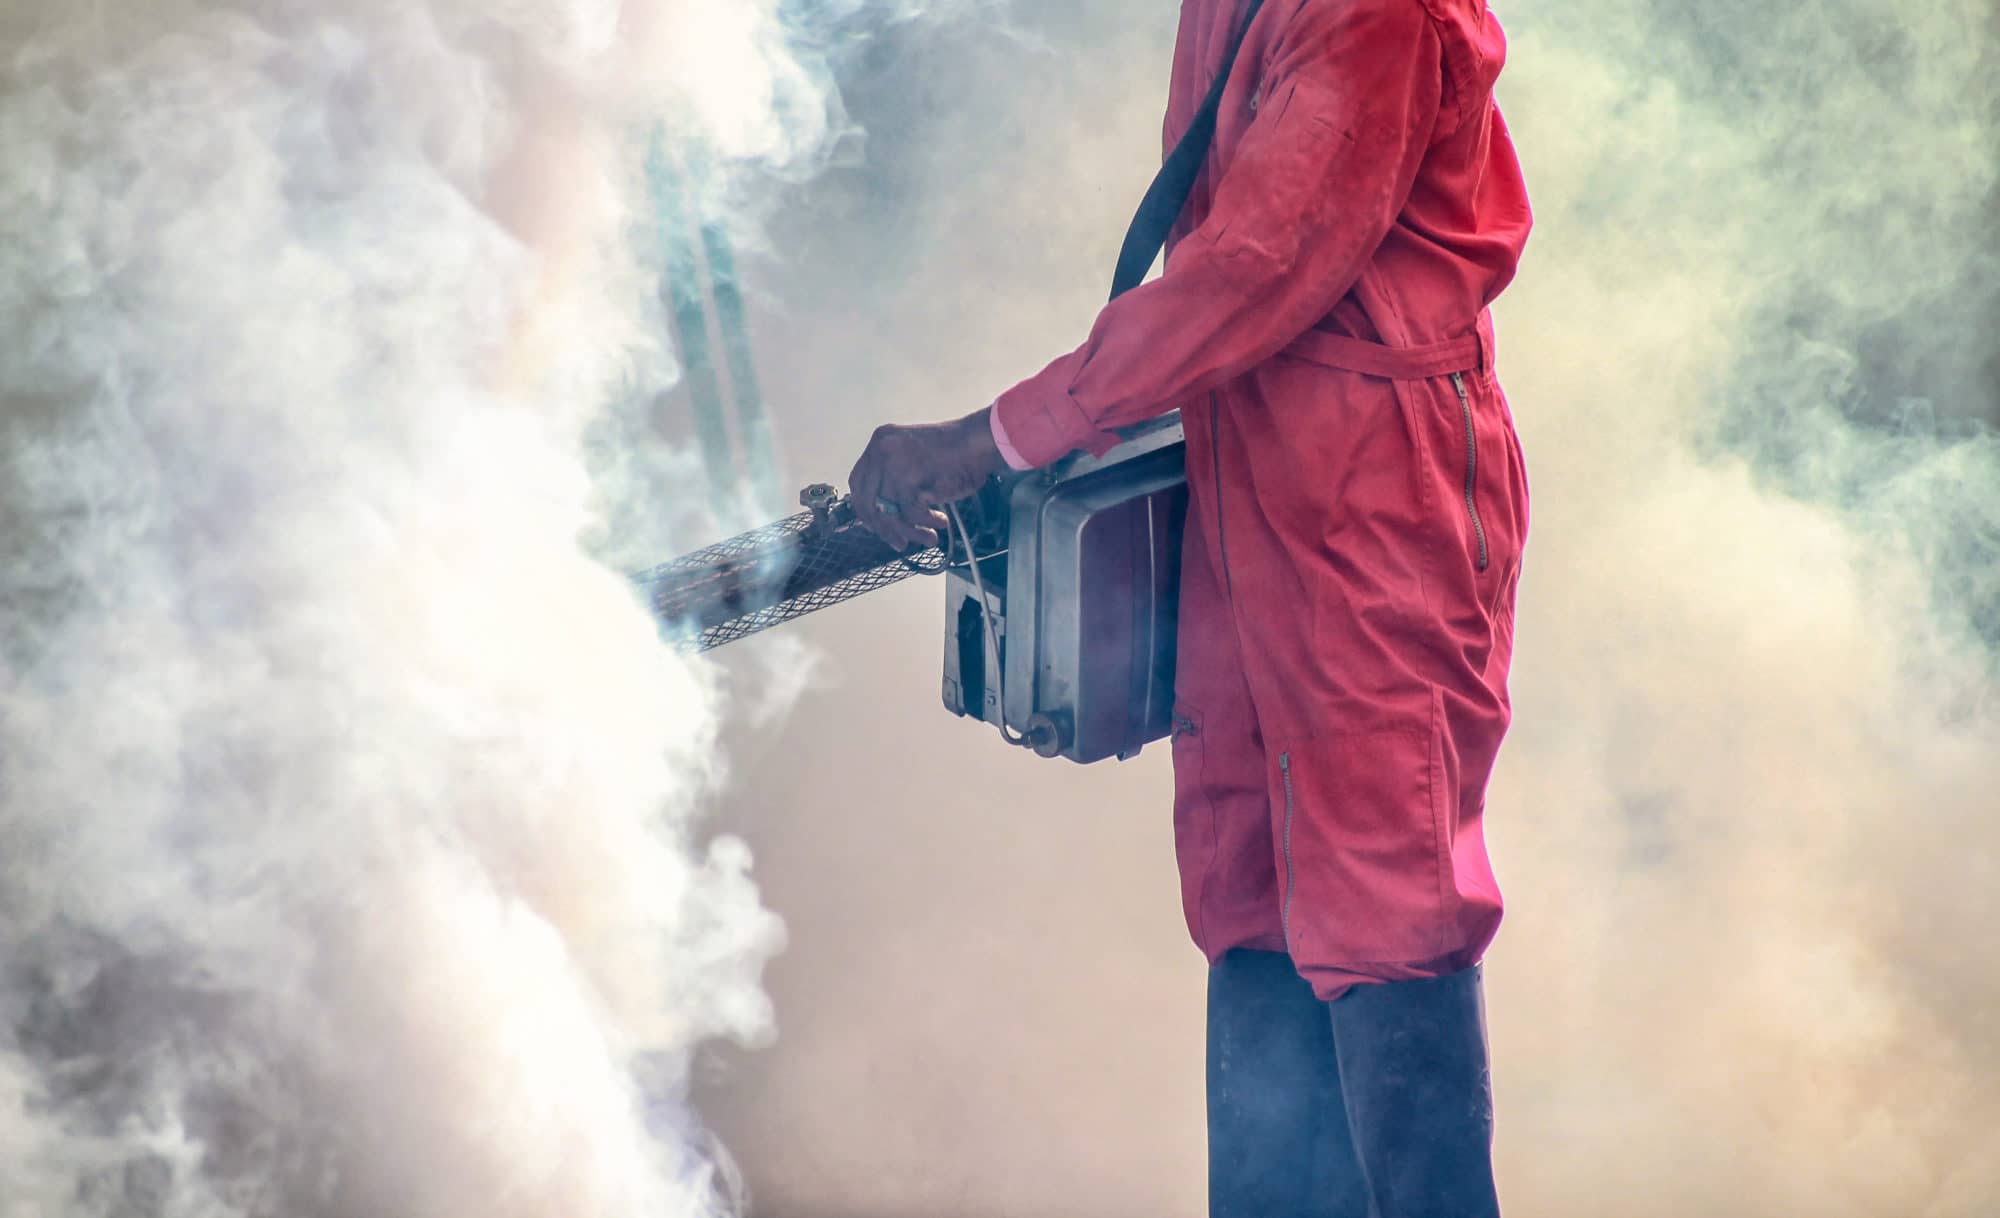 Man in red protective gear, fumigating.